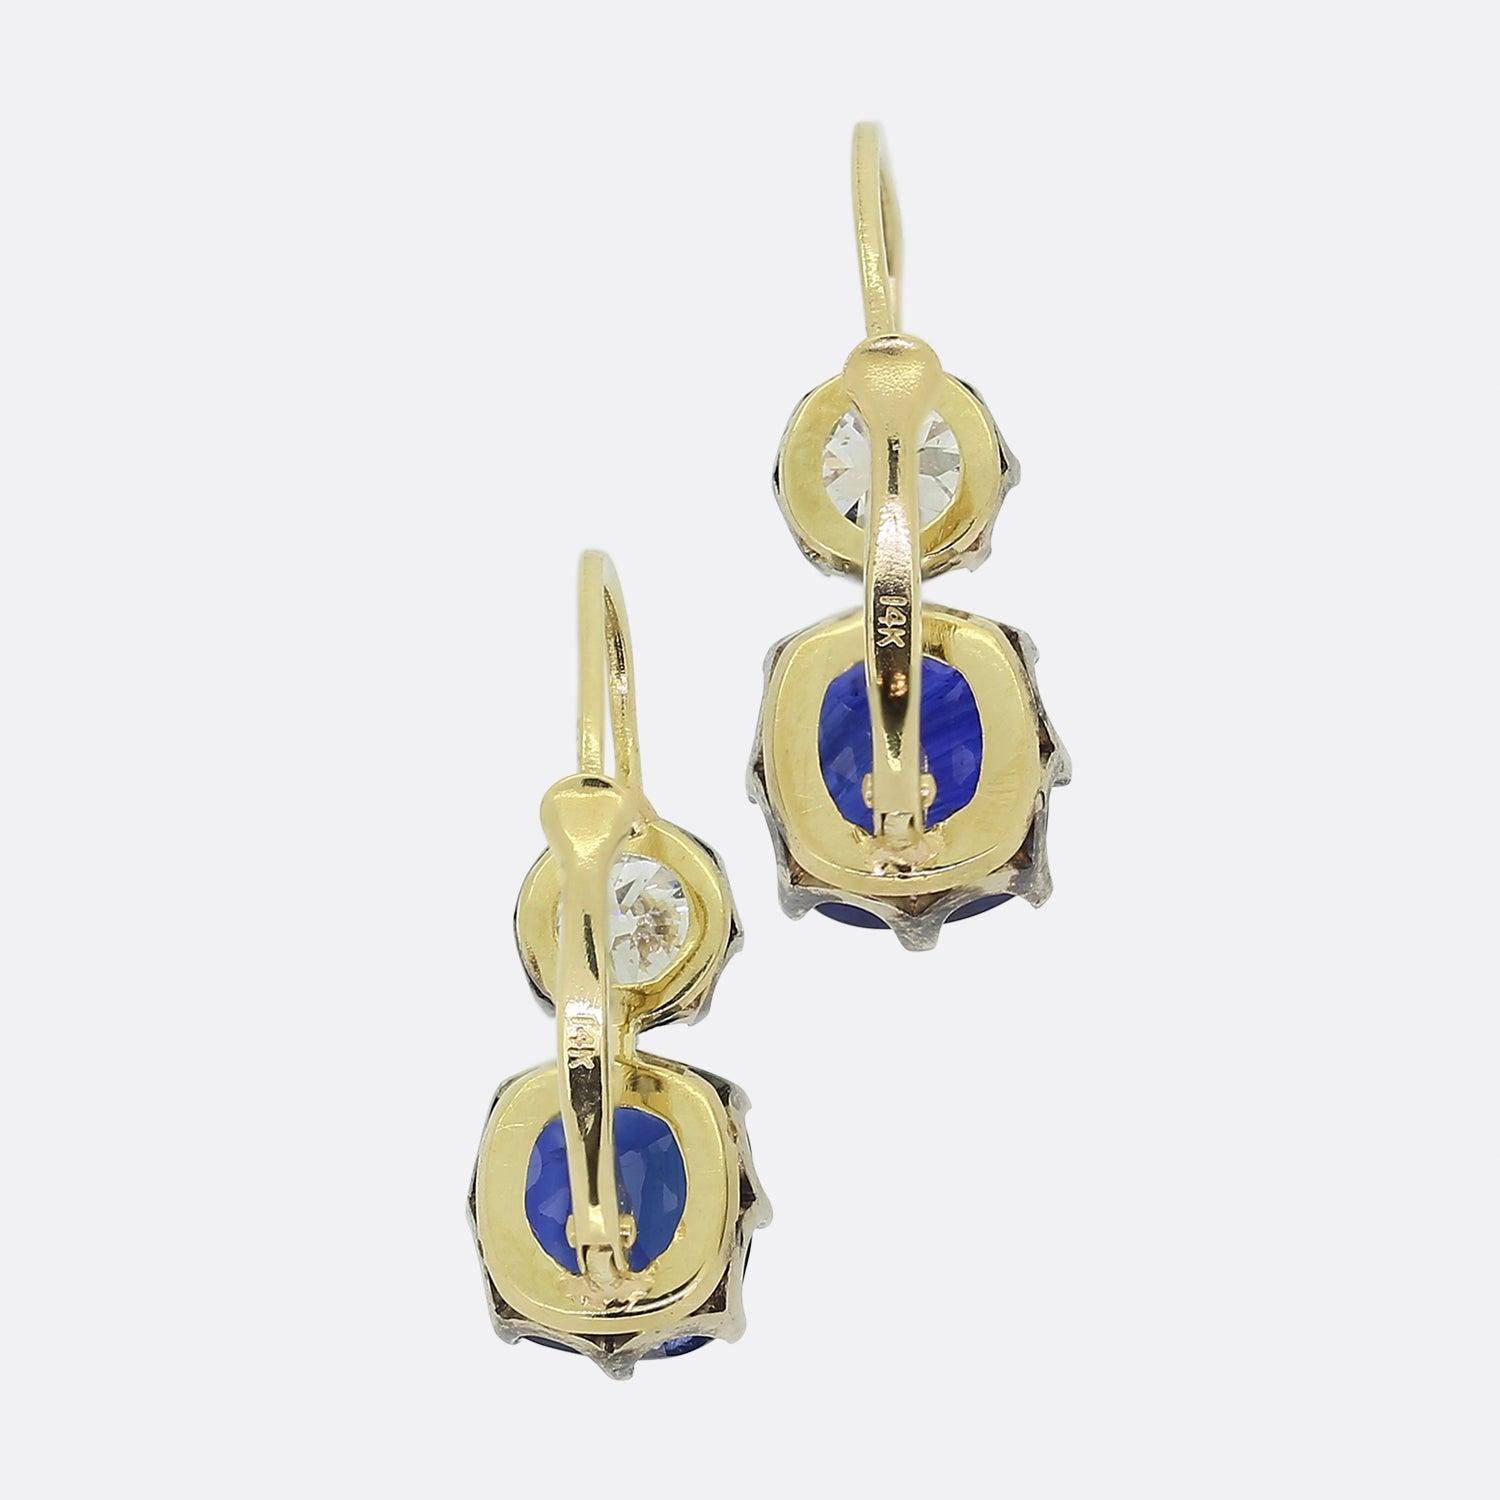 Here we have a wonderful pair of antique sapphire and diamond dormeuse earrings. Each earring features a cushion cut sapphire with an old European cut diamond above. The natural sapphires are perfectly matched and a lovely mid to dark blue tone. The